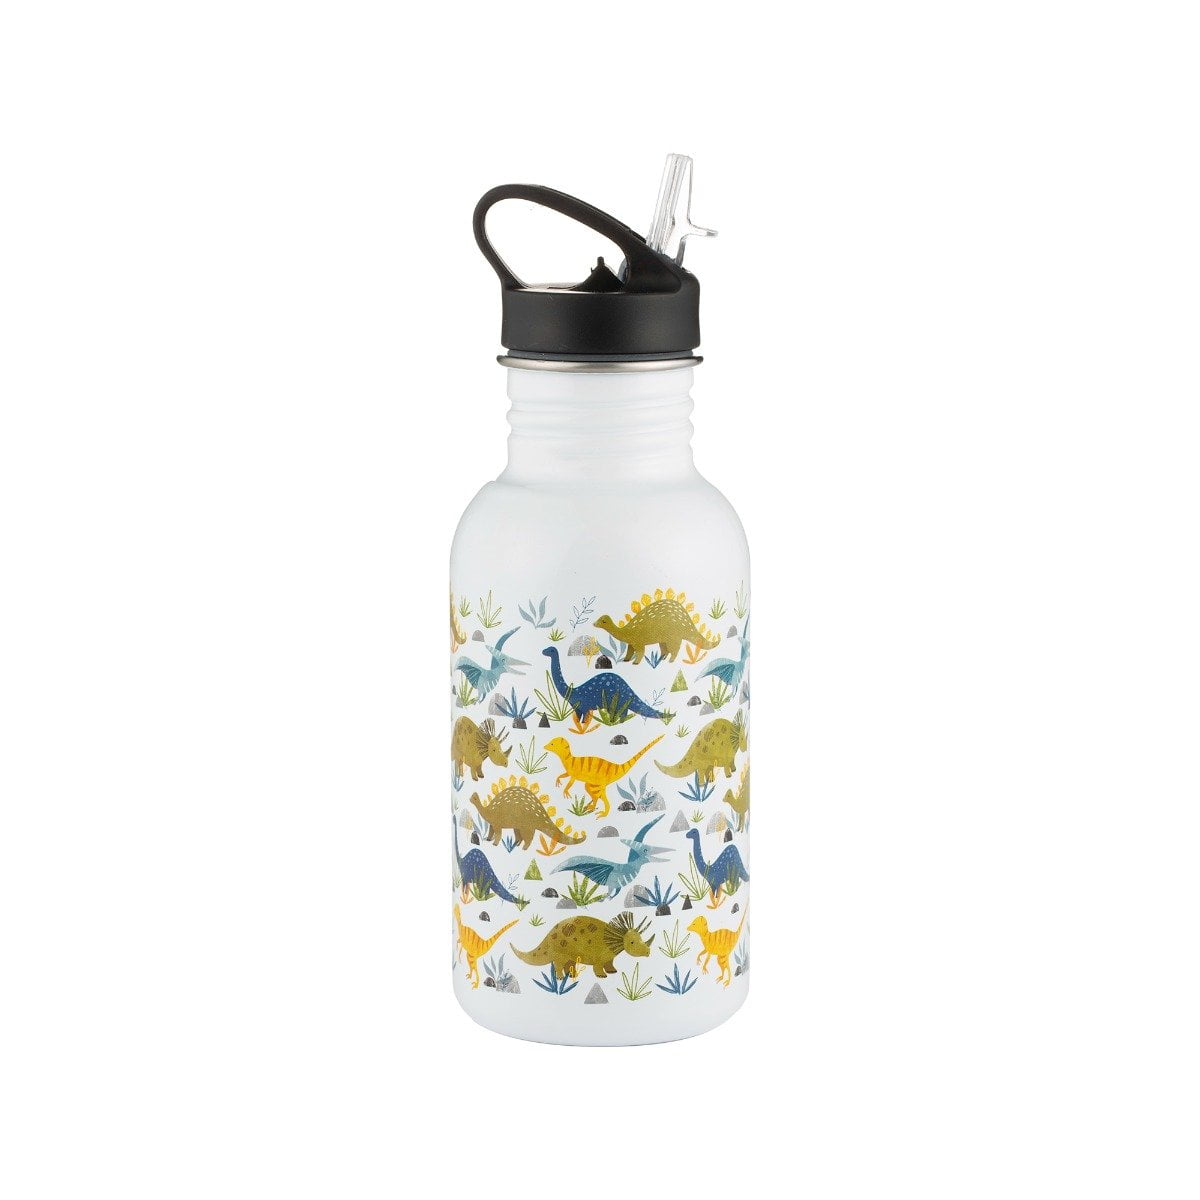 Cheeky Go Insulated Stainless Steel Bottle with Screw Lid Cheeky Home 